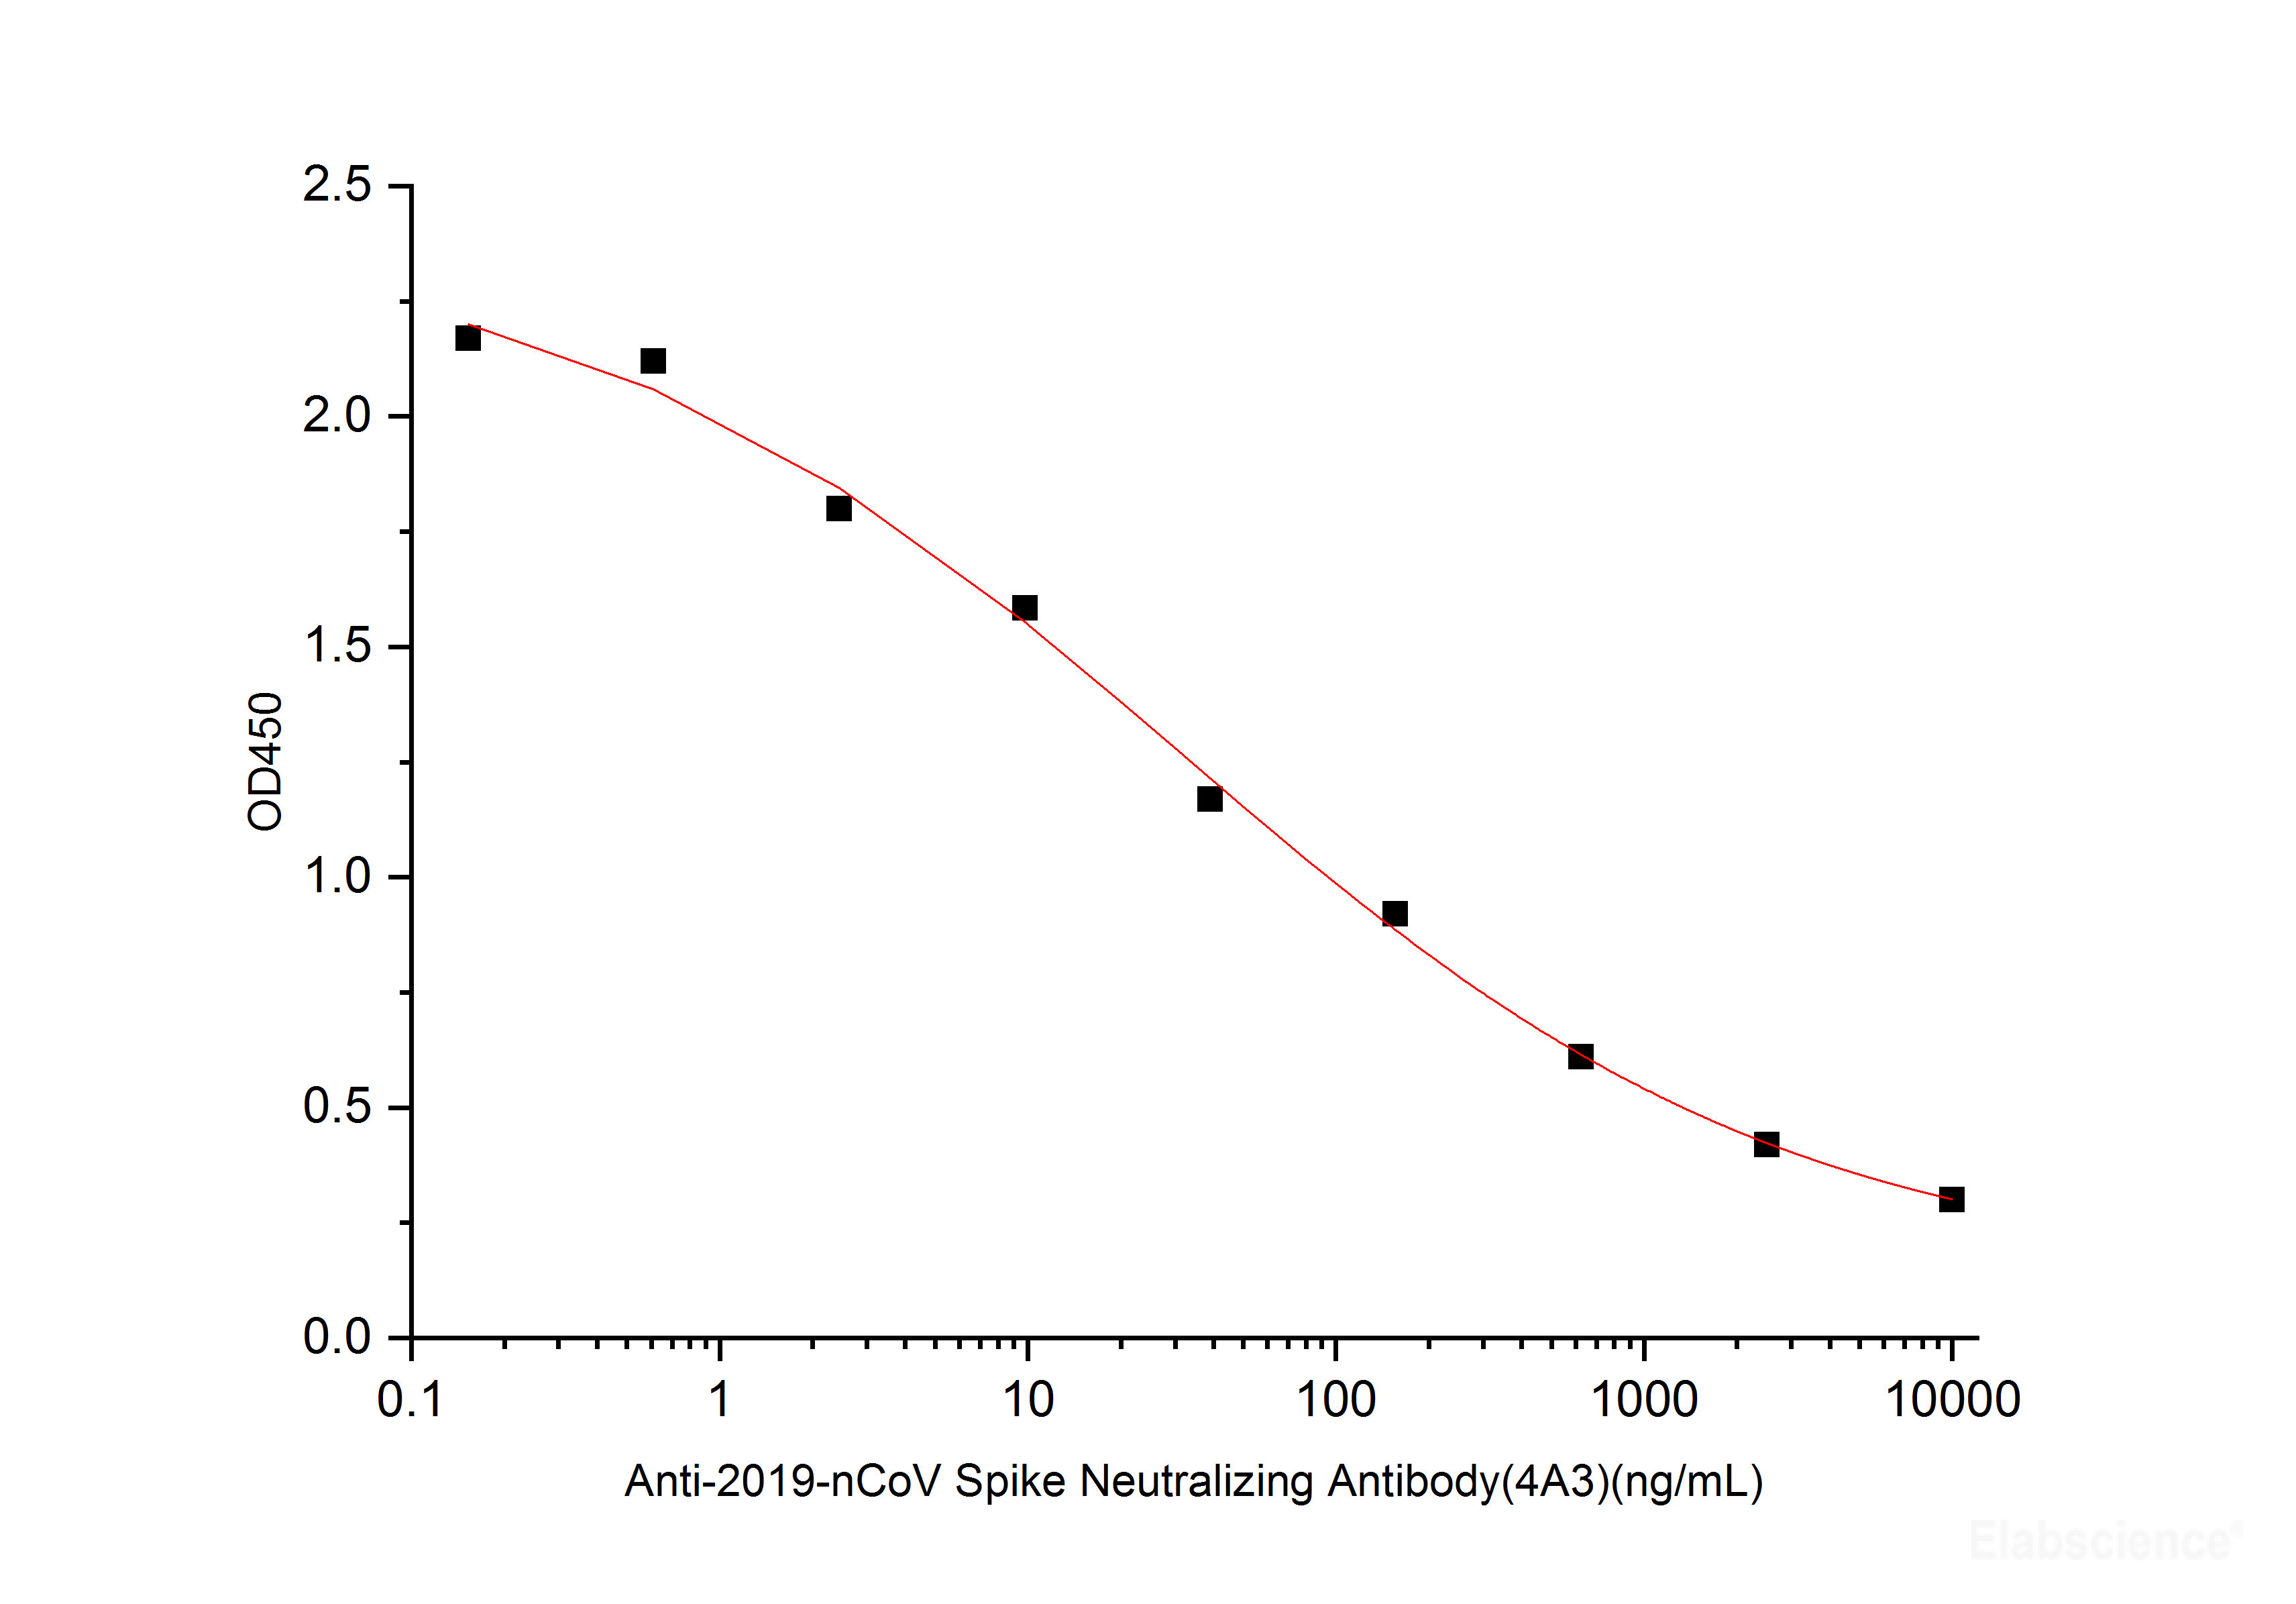 Anti-2019-nCoV Spike Neutralizing Antibody(4A3) can block Human ACE2 Protein (His Tag) and 2019-nCoV Spike Protein (RBD, mFc Tag) interaction, the IC50 for this effect is 231 ng/mL.